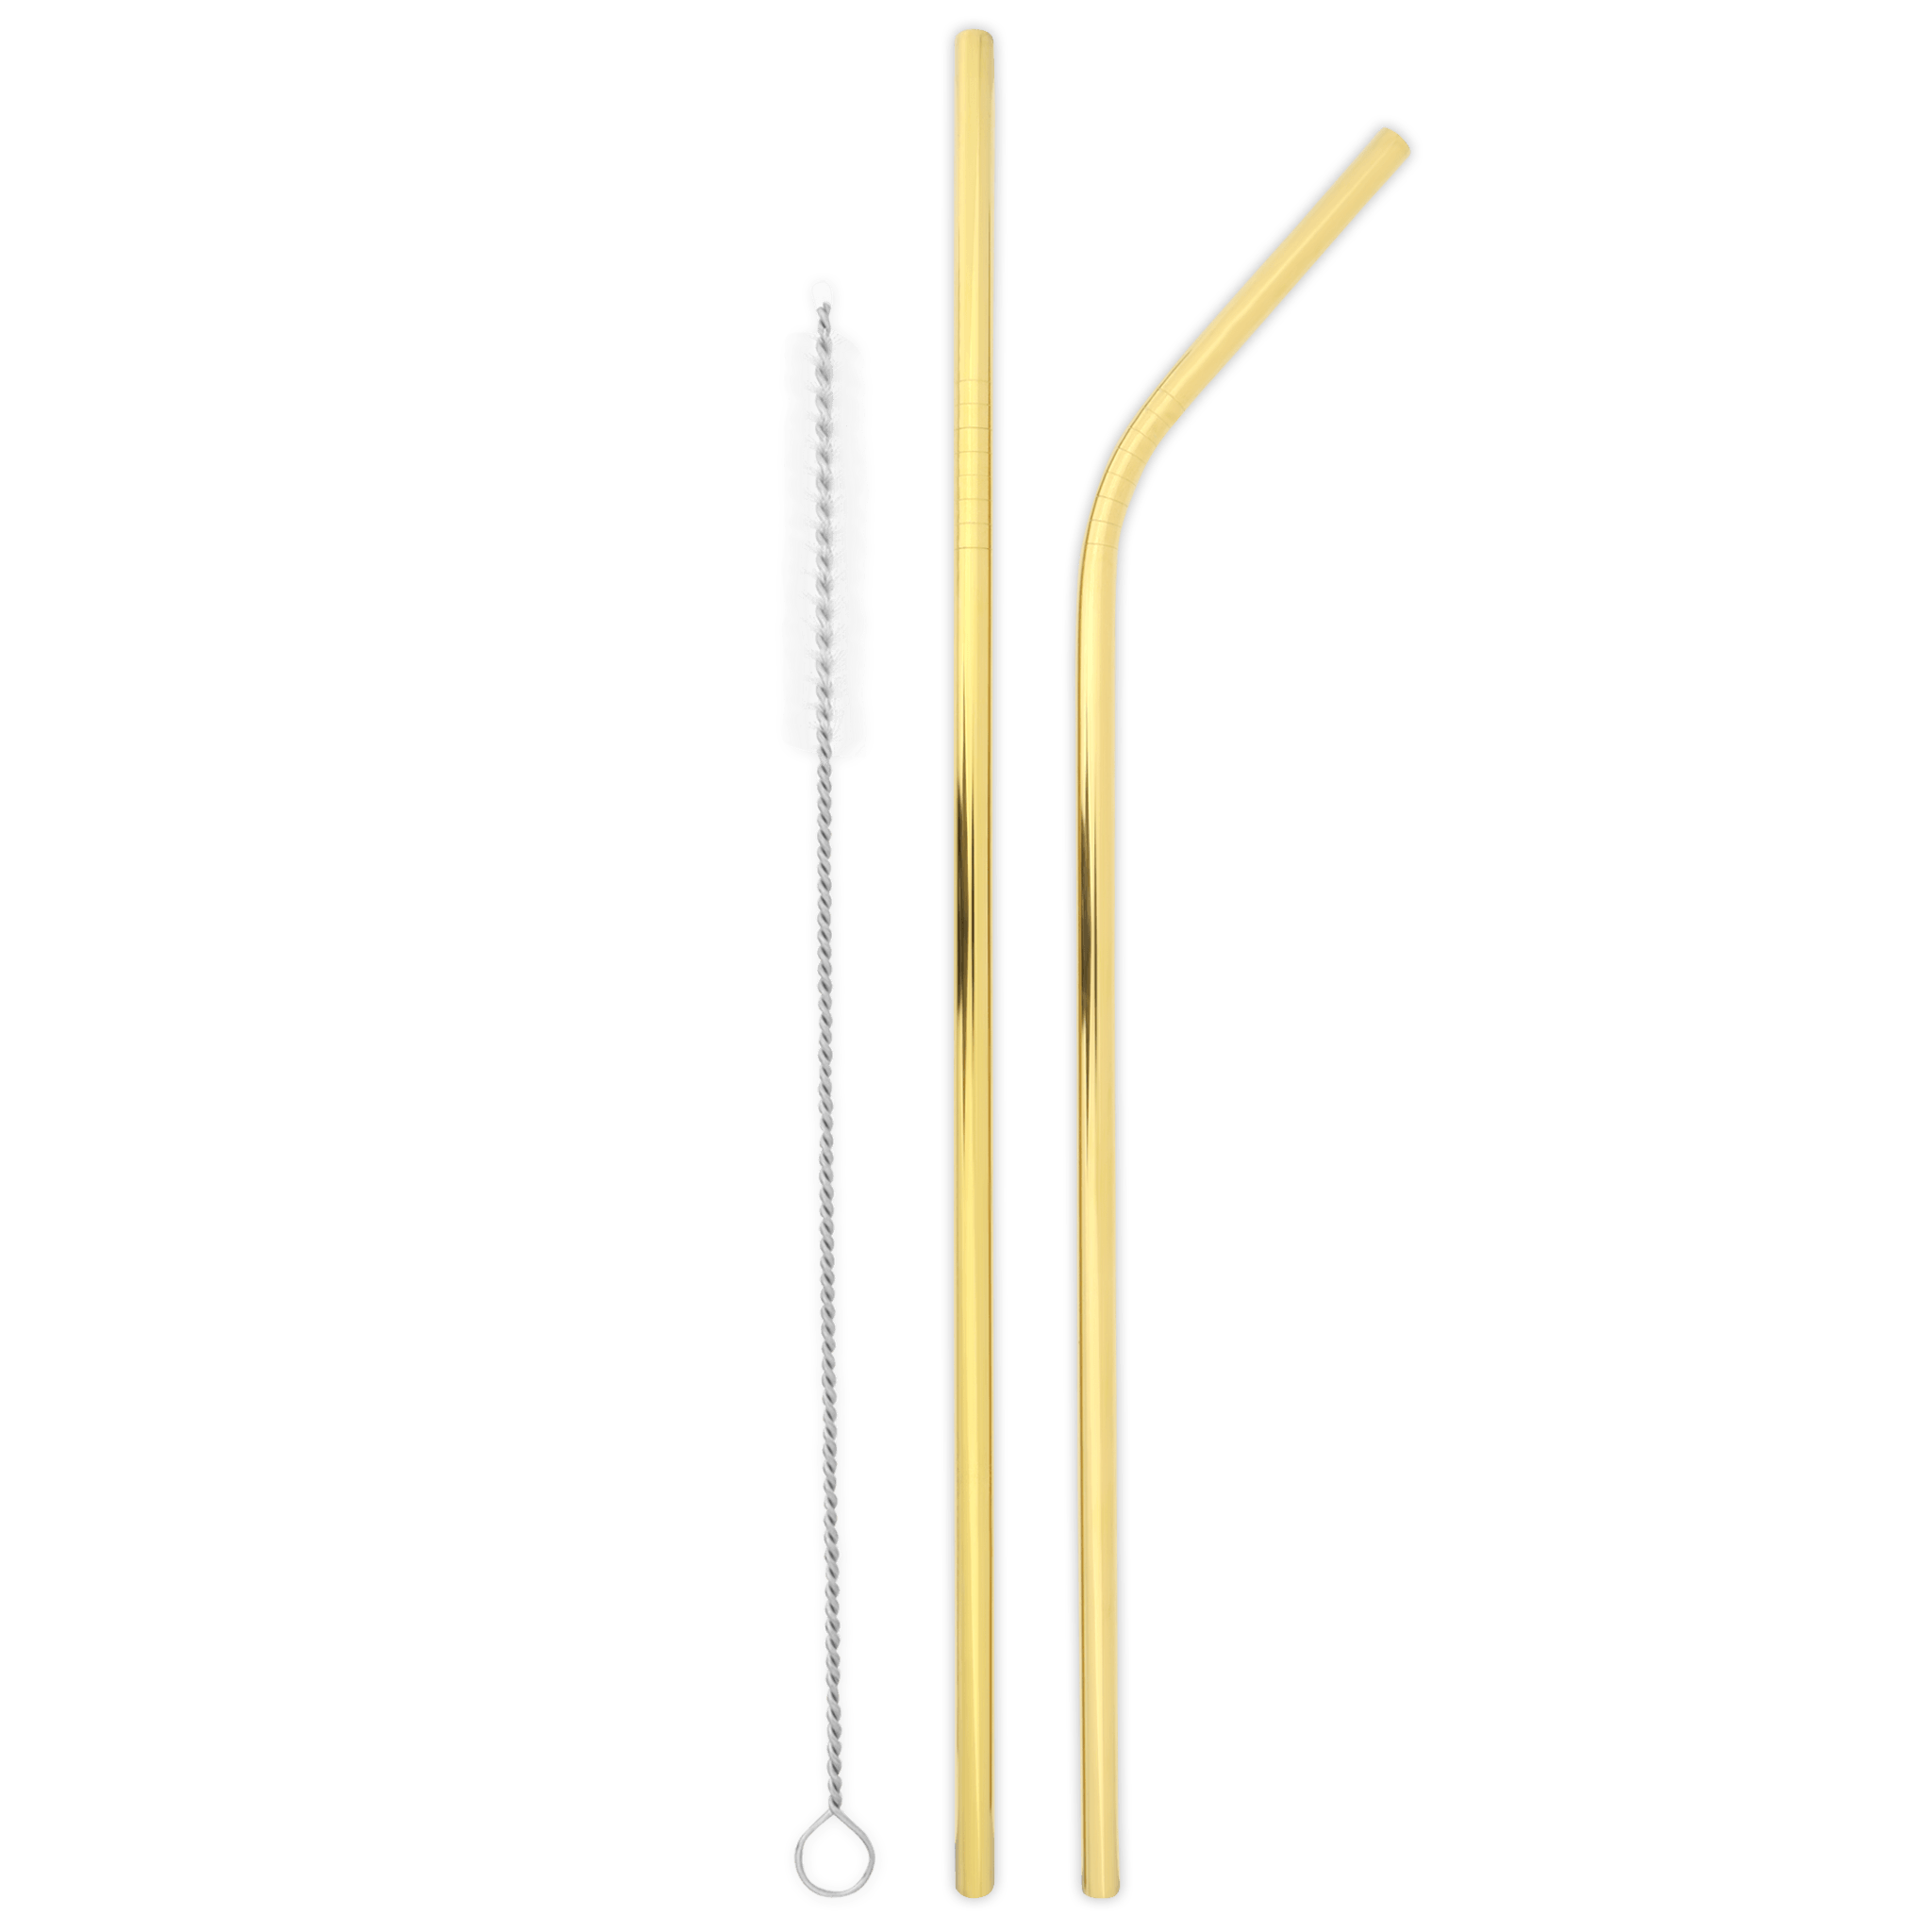 Long Double Trouble Stainless Steel Straw Set with Travel Pouch (Gold)